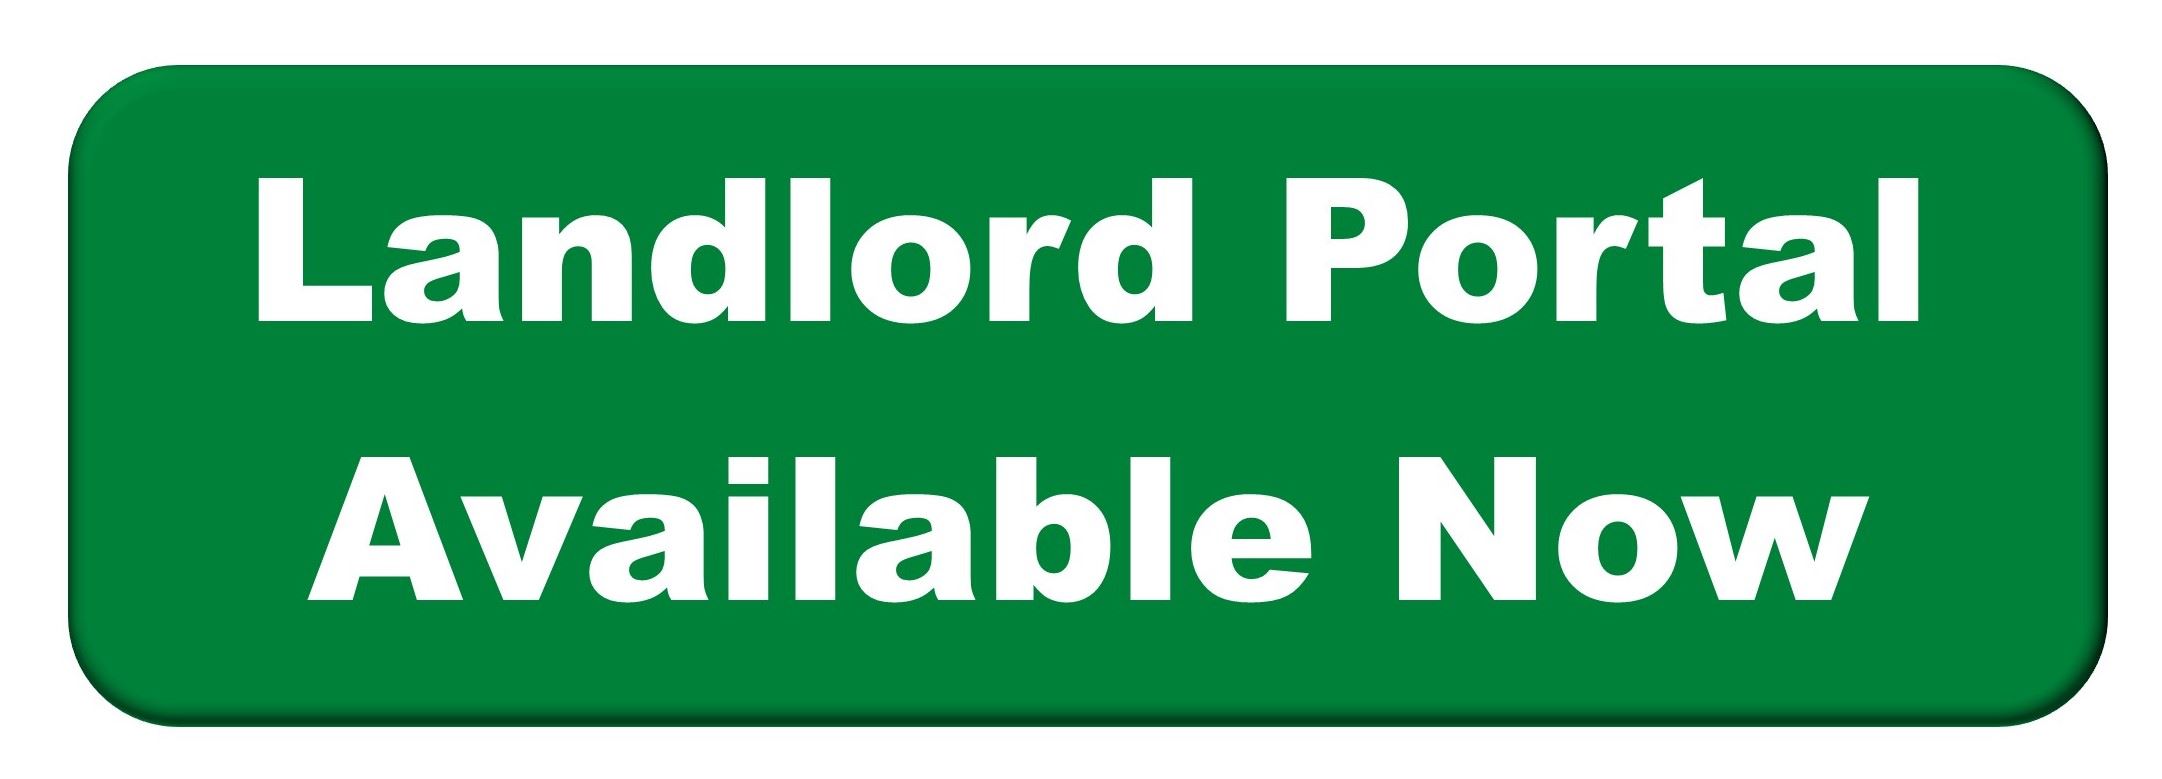 Landlord Portal Available Now 